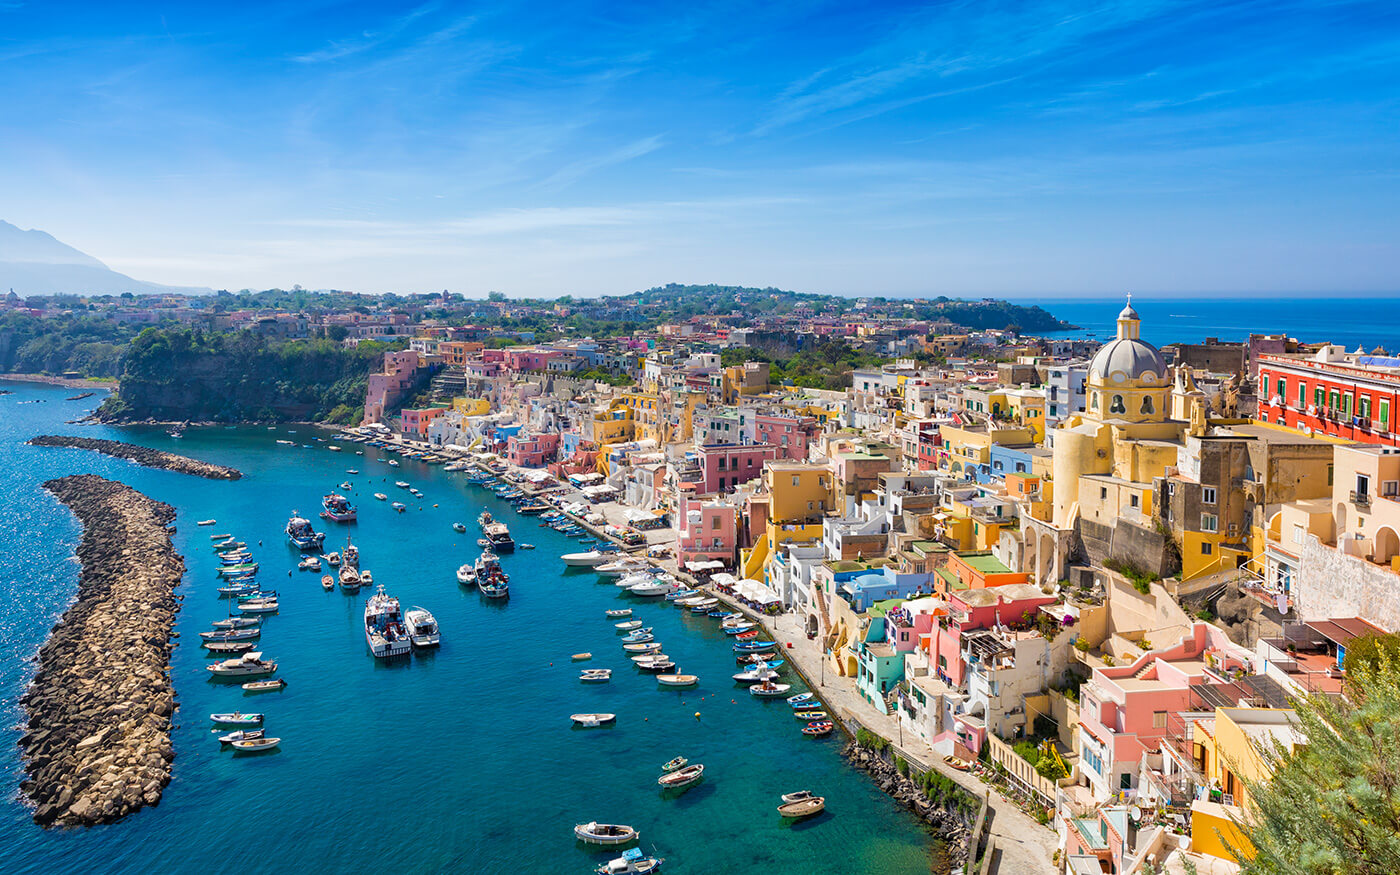 Excursion and Mini-cruise to Ischia and Procida